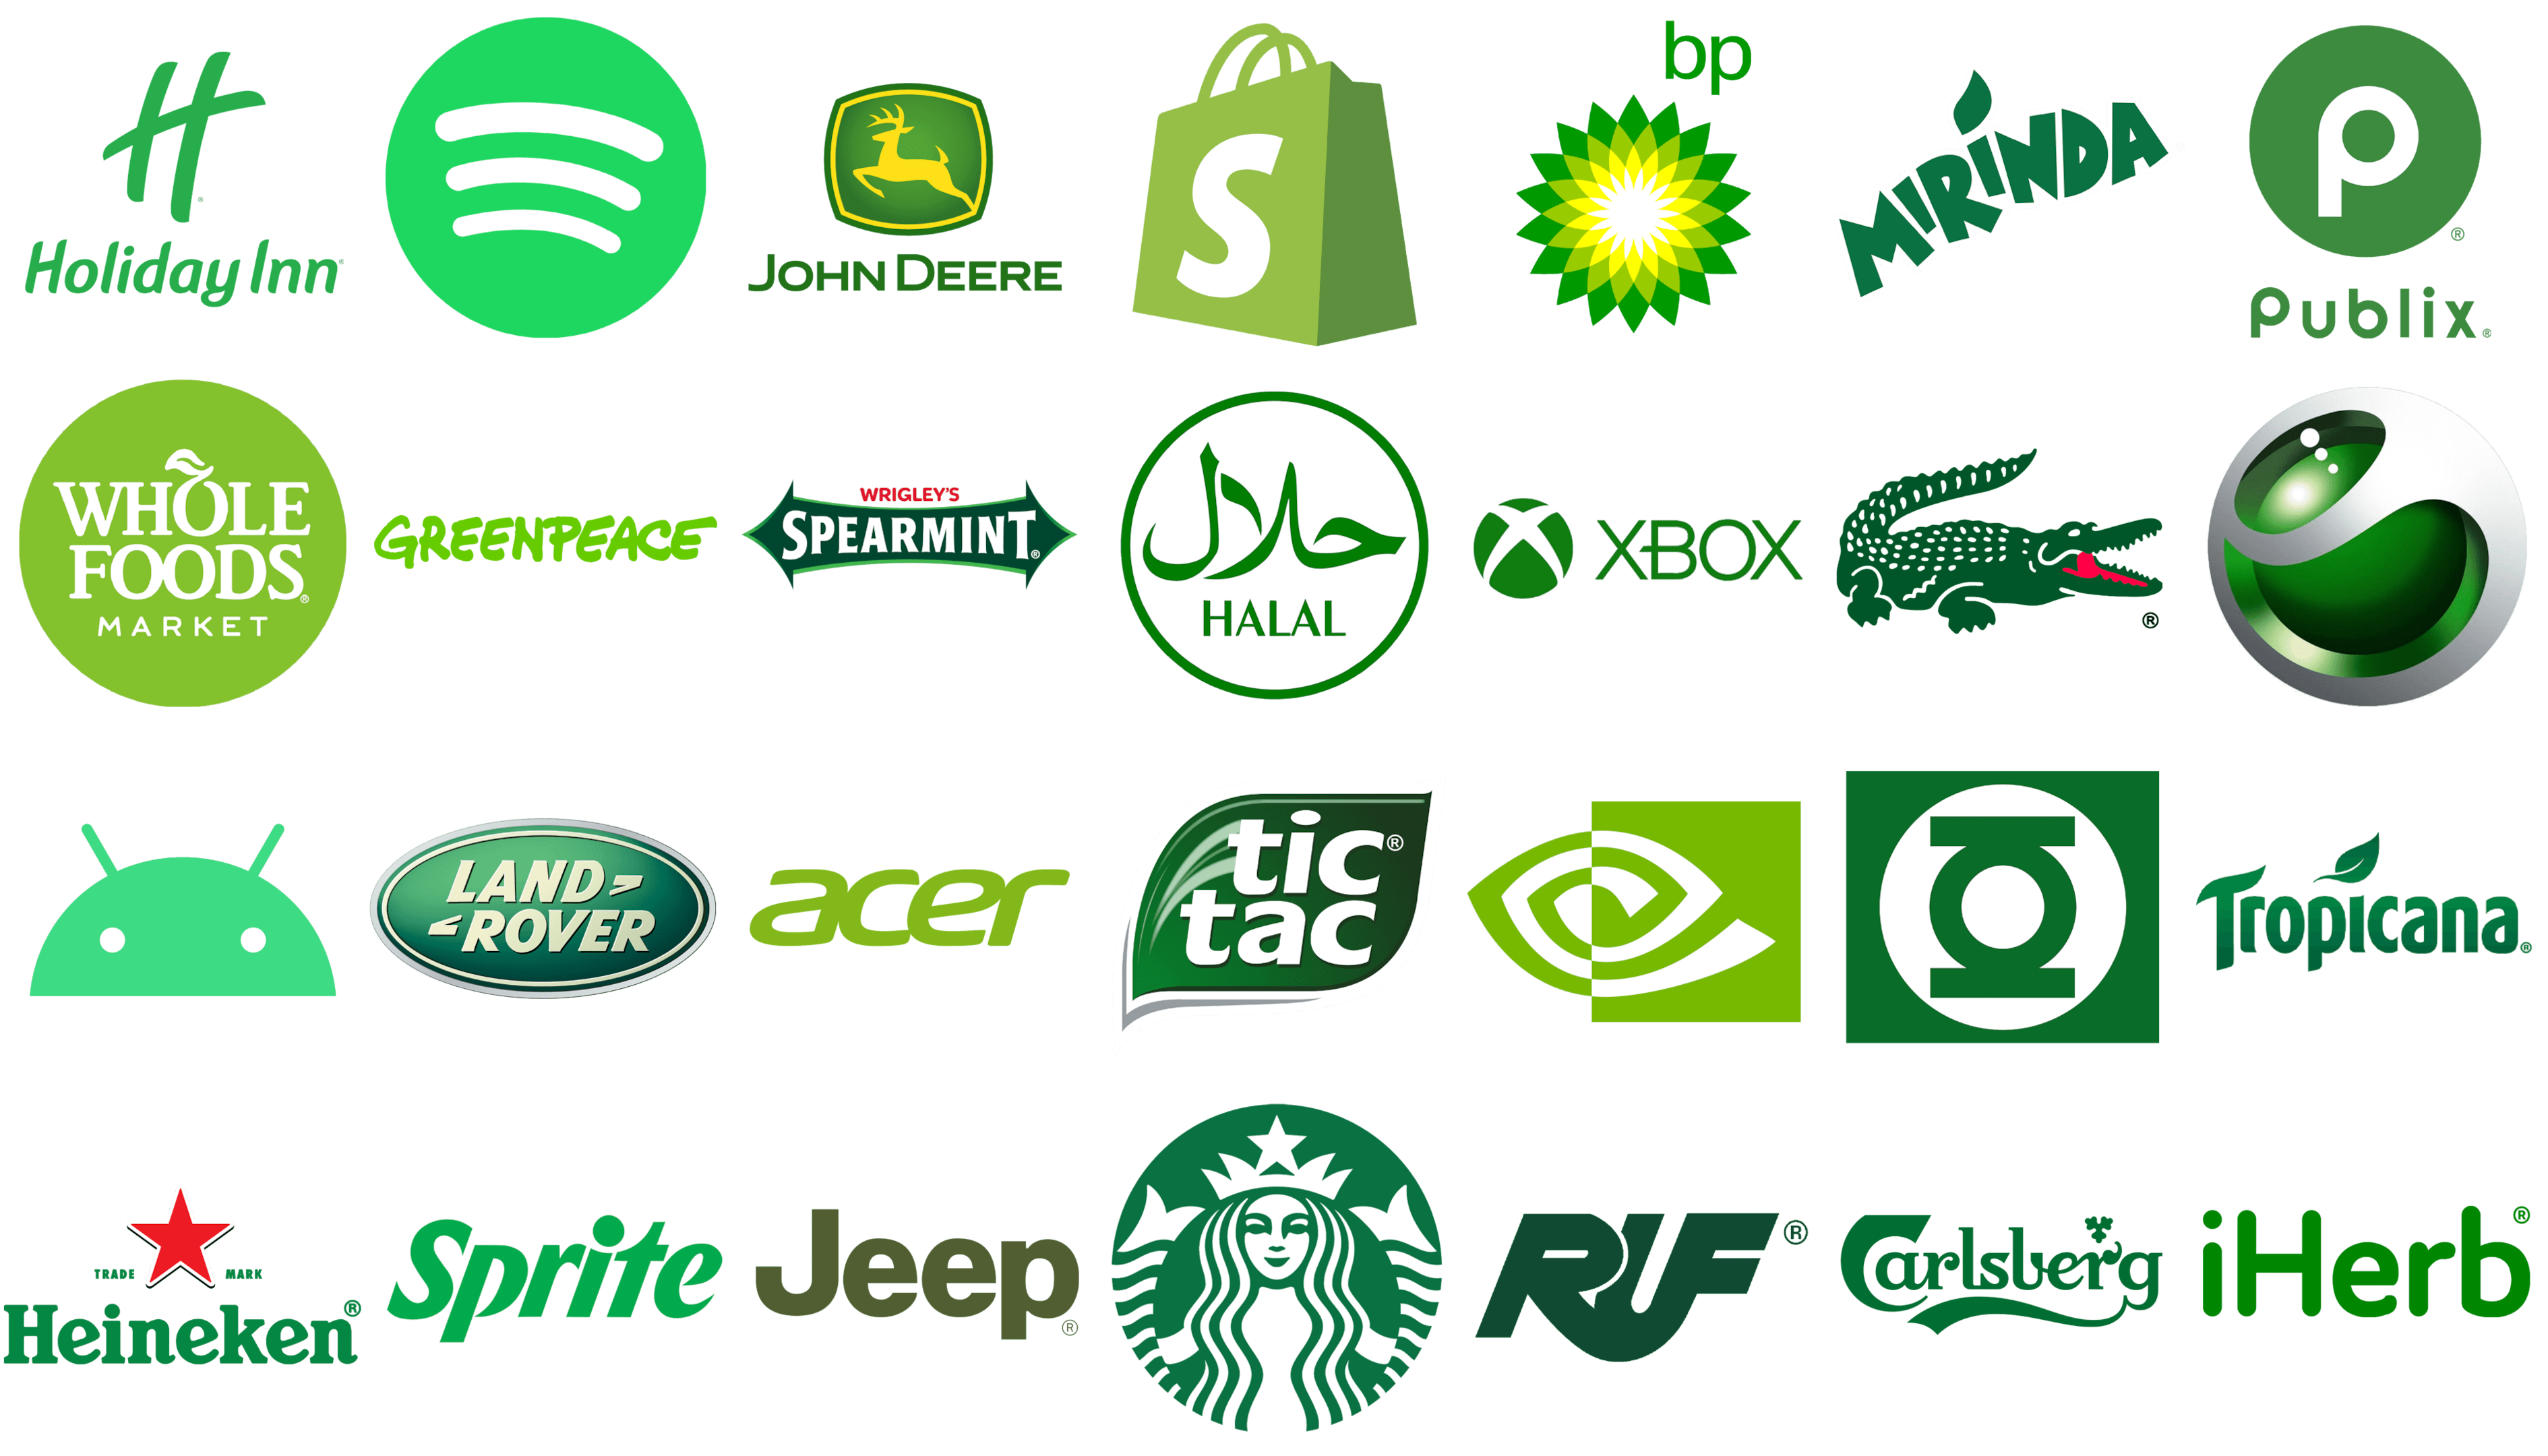 Highly popular brands with green logos. 